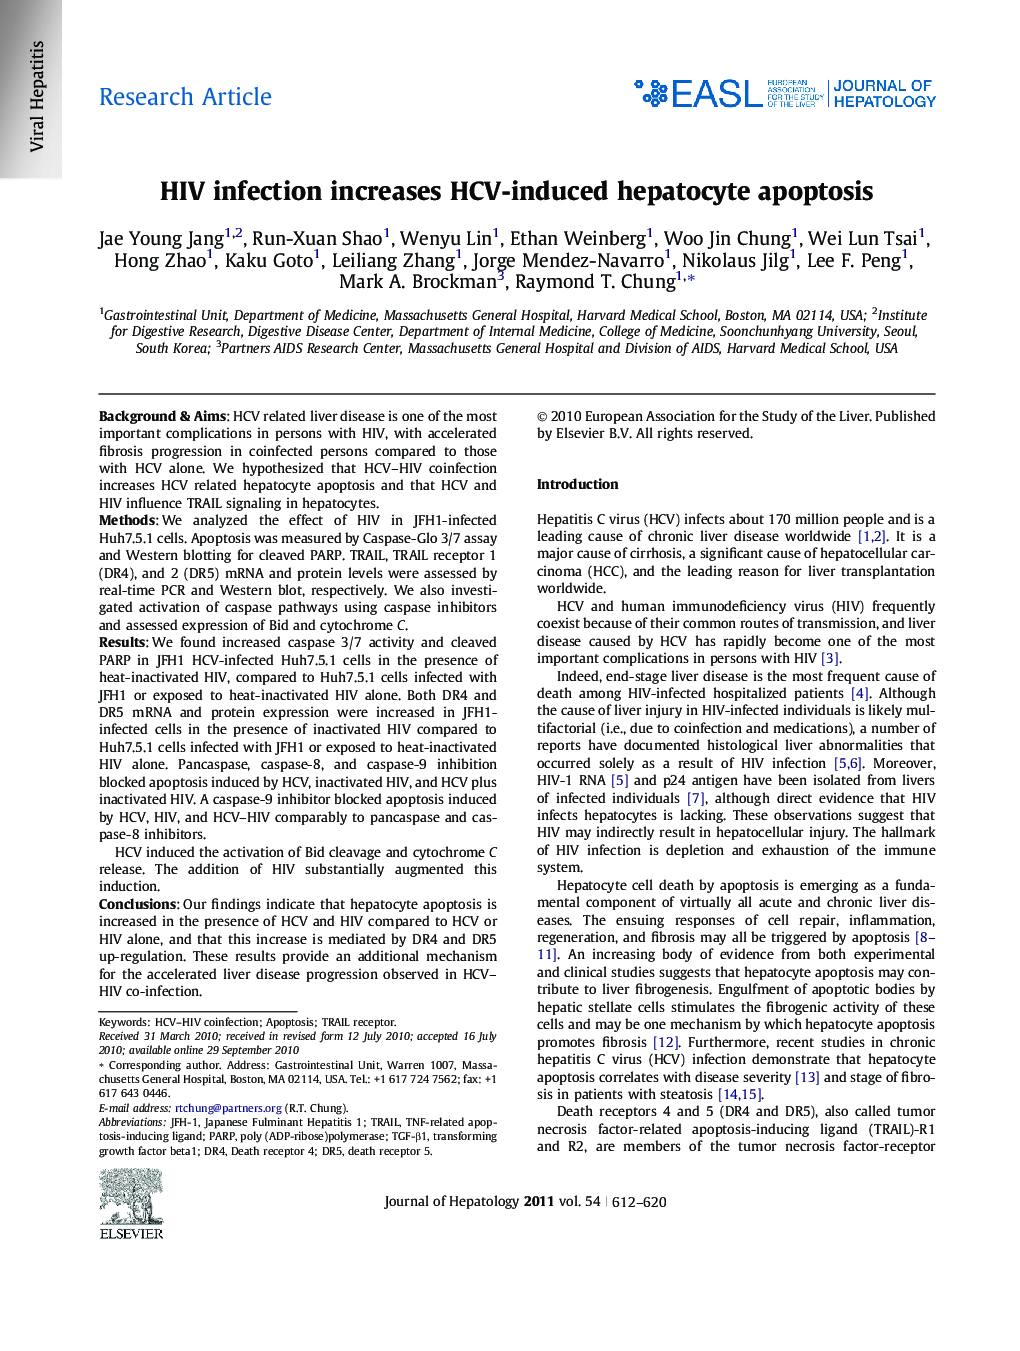 Research ArticleHIV infection increases HCV-induced hepatocyte apoptosis